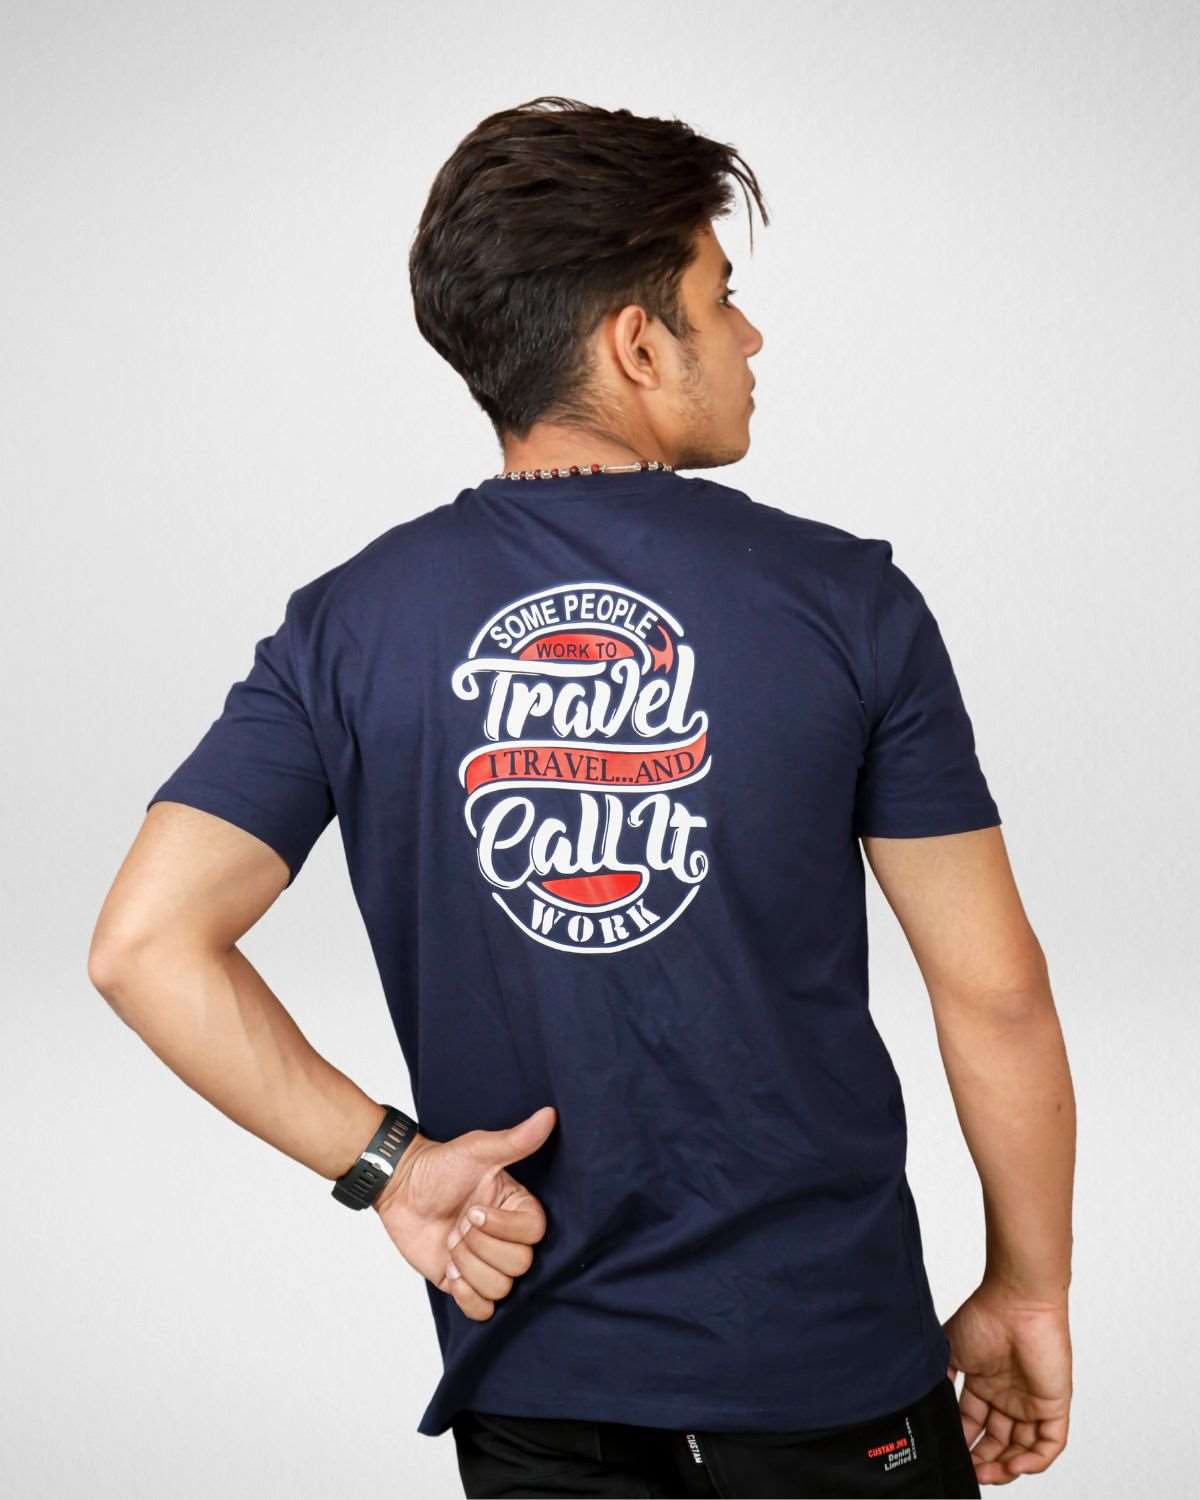 Travel Navy Blue Cotton Mens Tshirt - Front & Back Printed - Perfect for Travelling!